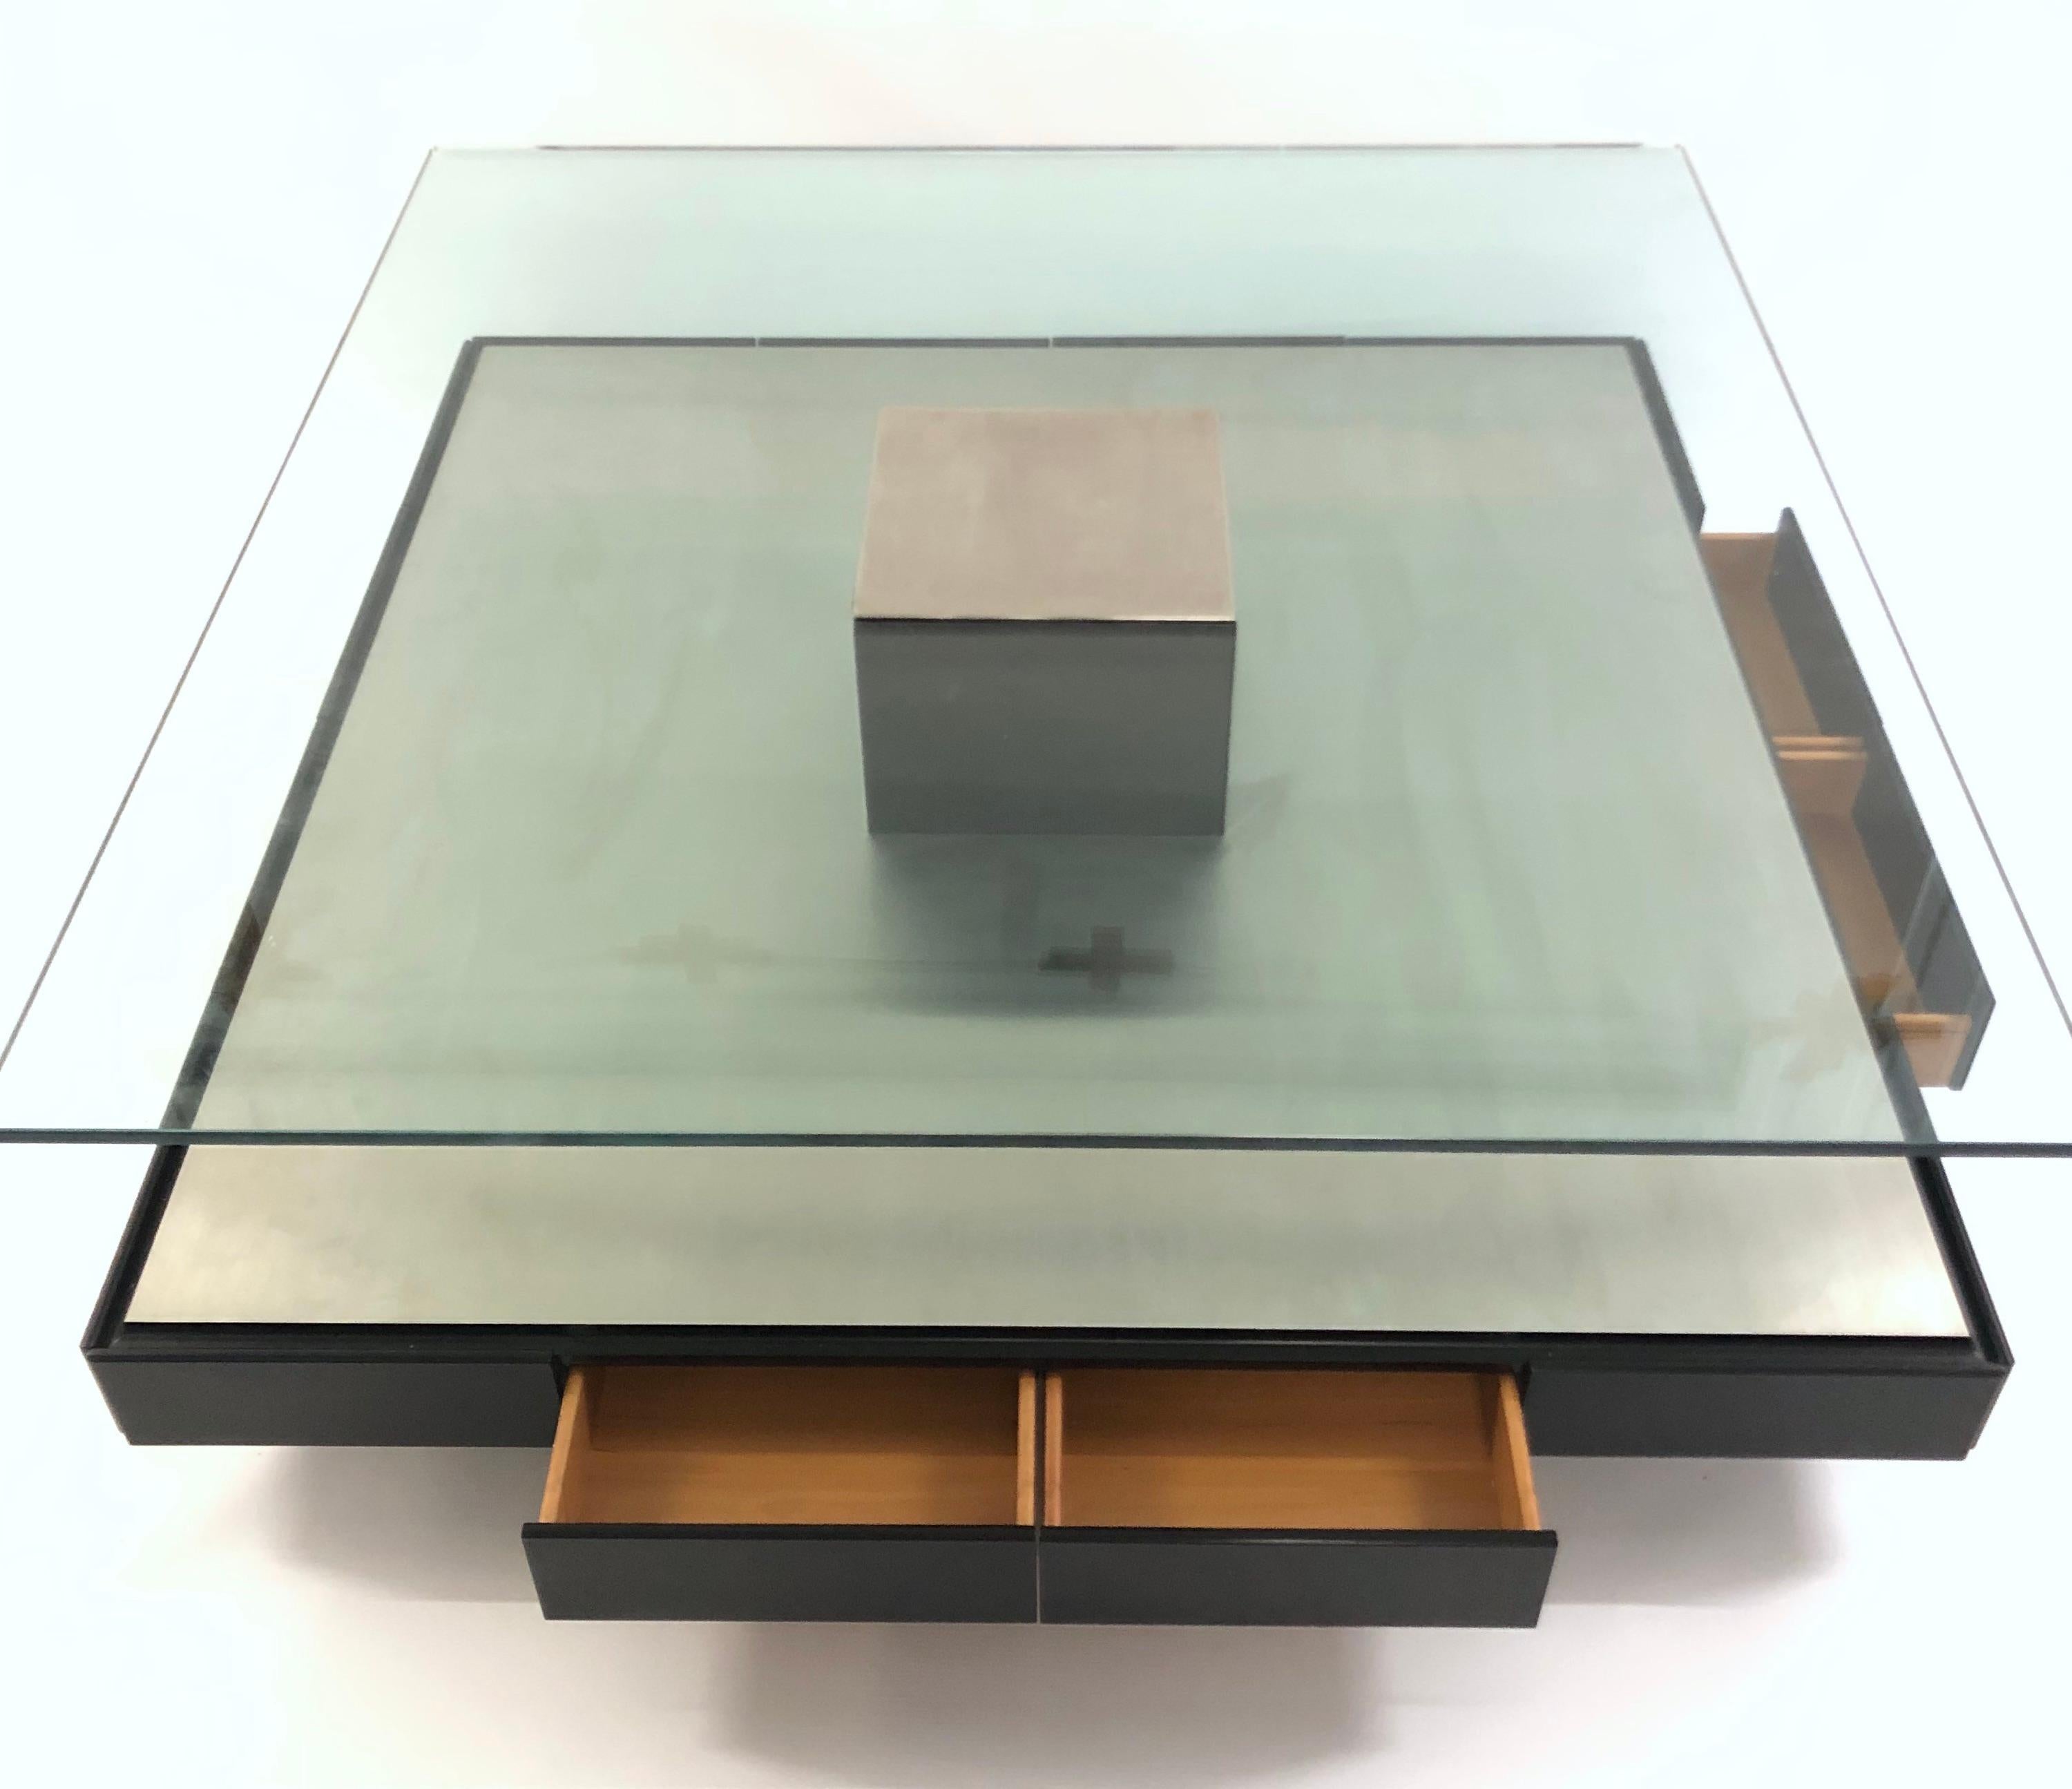 Designed in 1971 for Italian manufacturer Tecno by Marco Fantoni.
Consisting of brushed steel base with glass top.
Eight drawers located around the black lacquered plinth base. 
Central black lacquered block supporting the glass top. 
Central